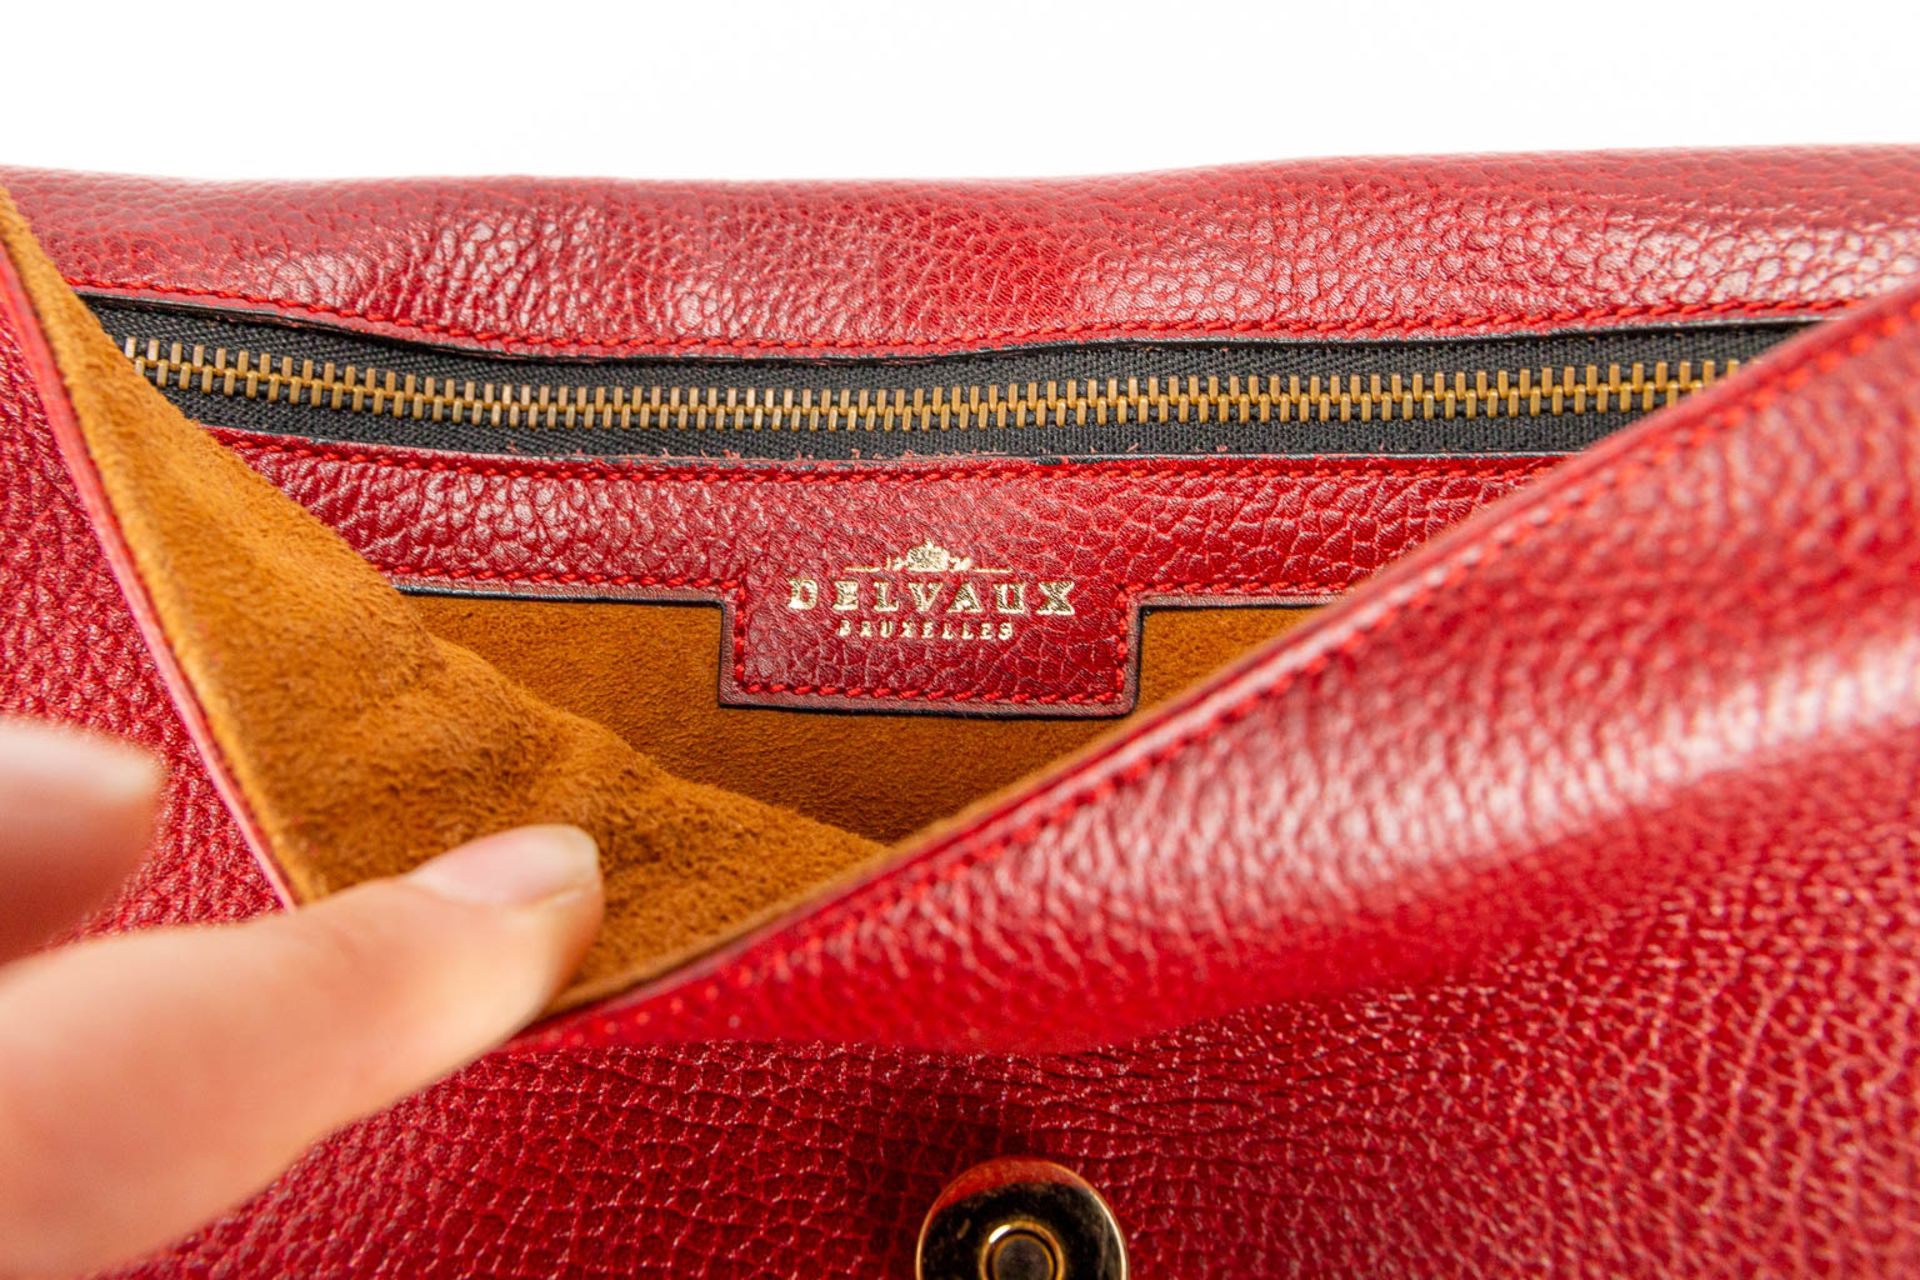 A purse made of red leather and marked Delvaux. - Image 12 of 16